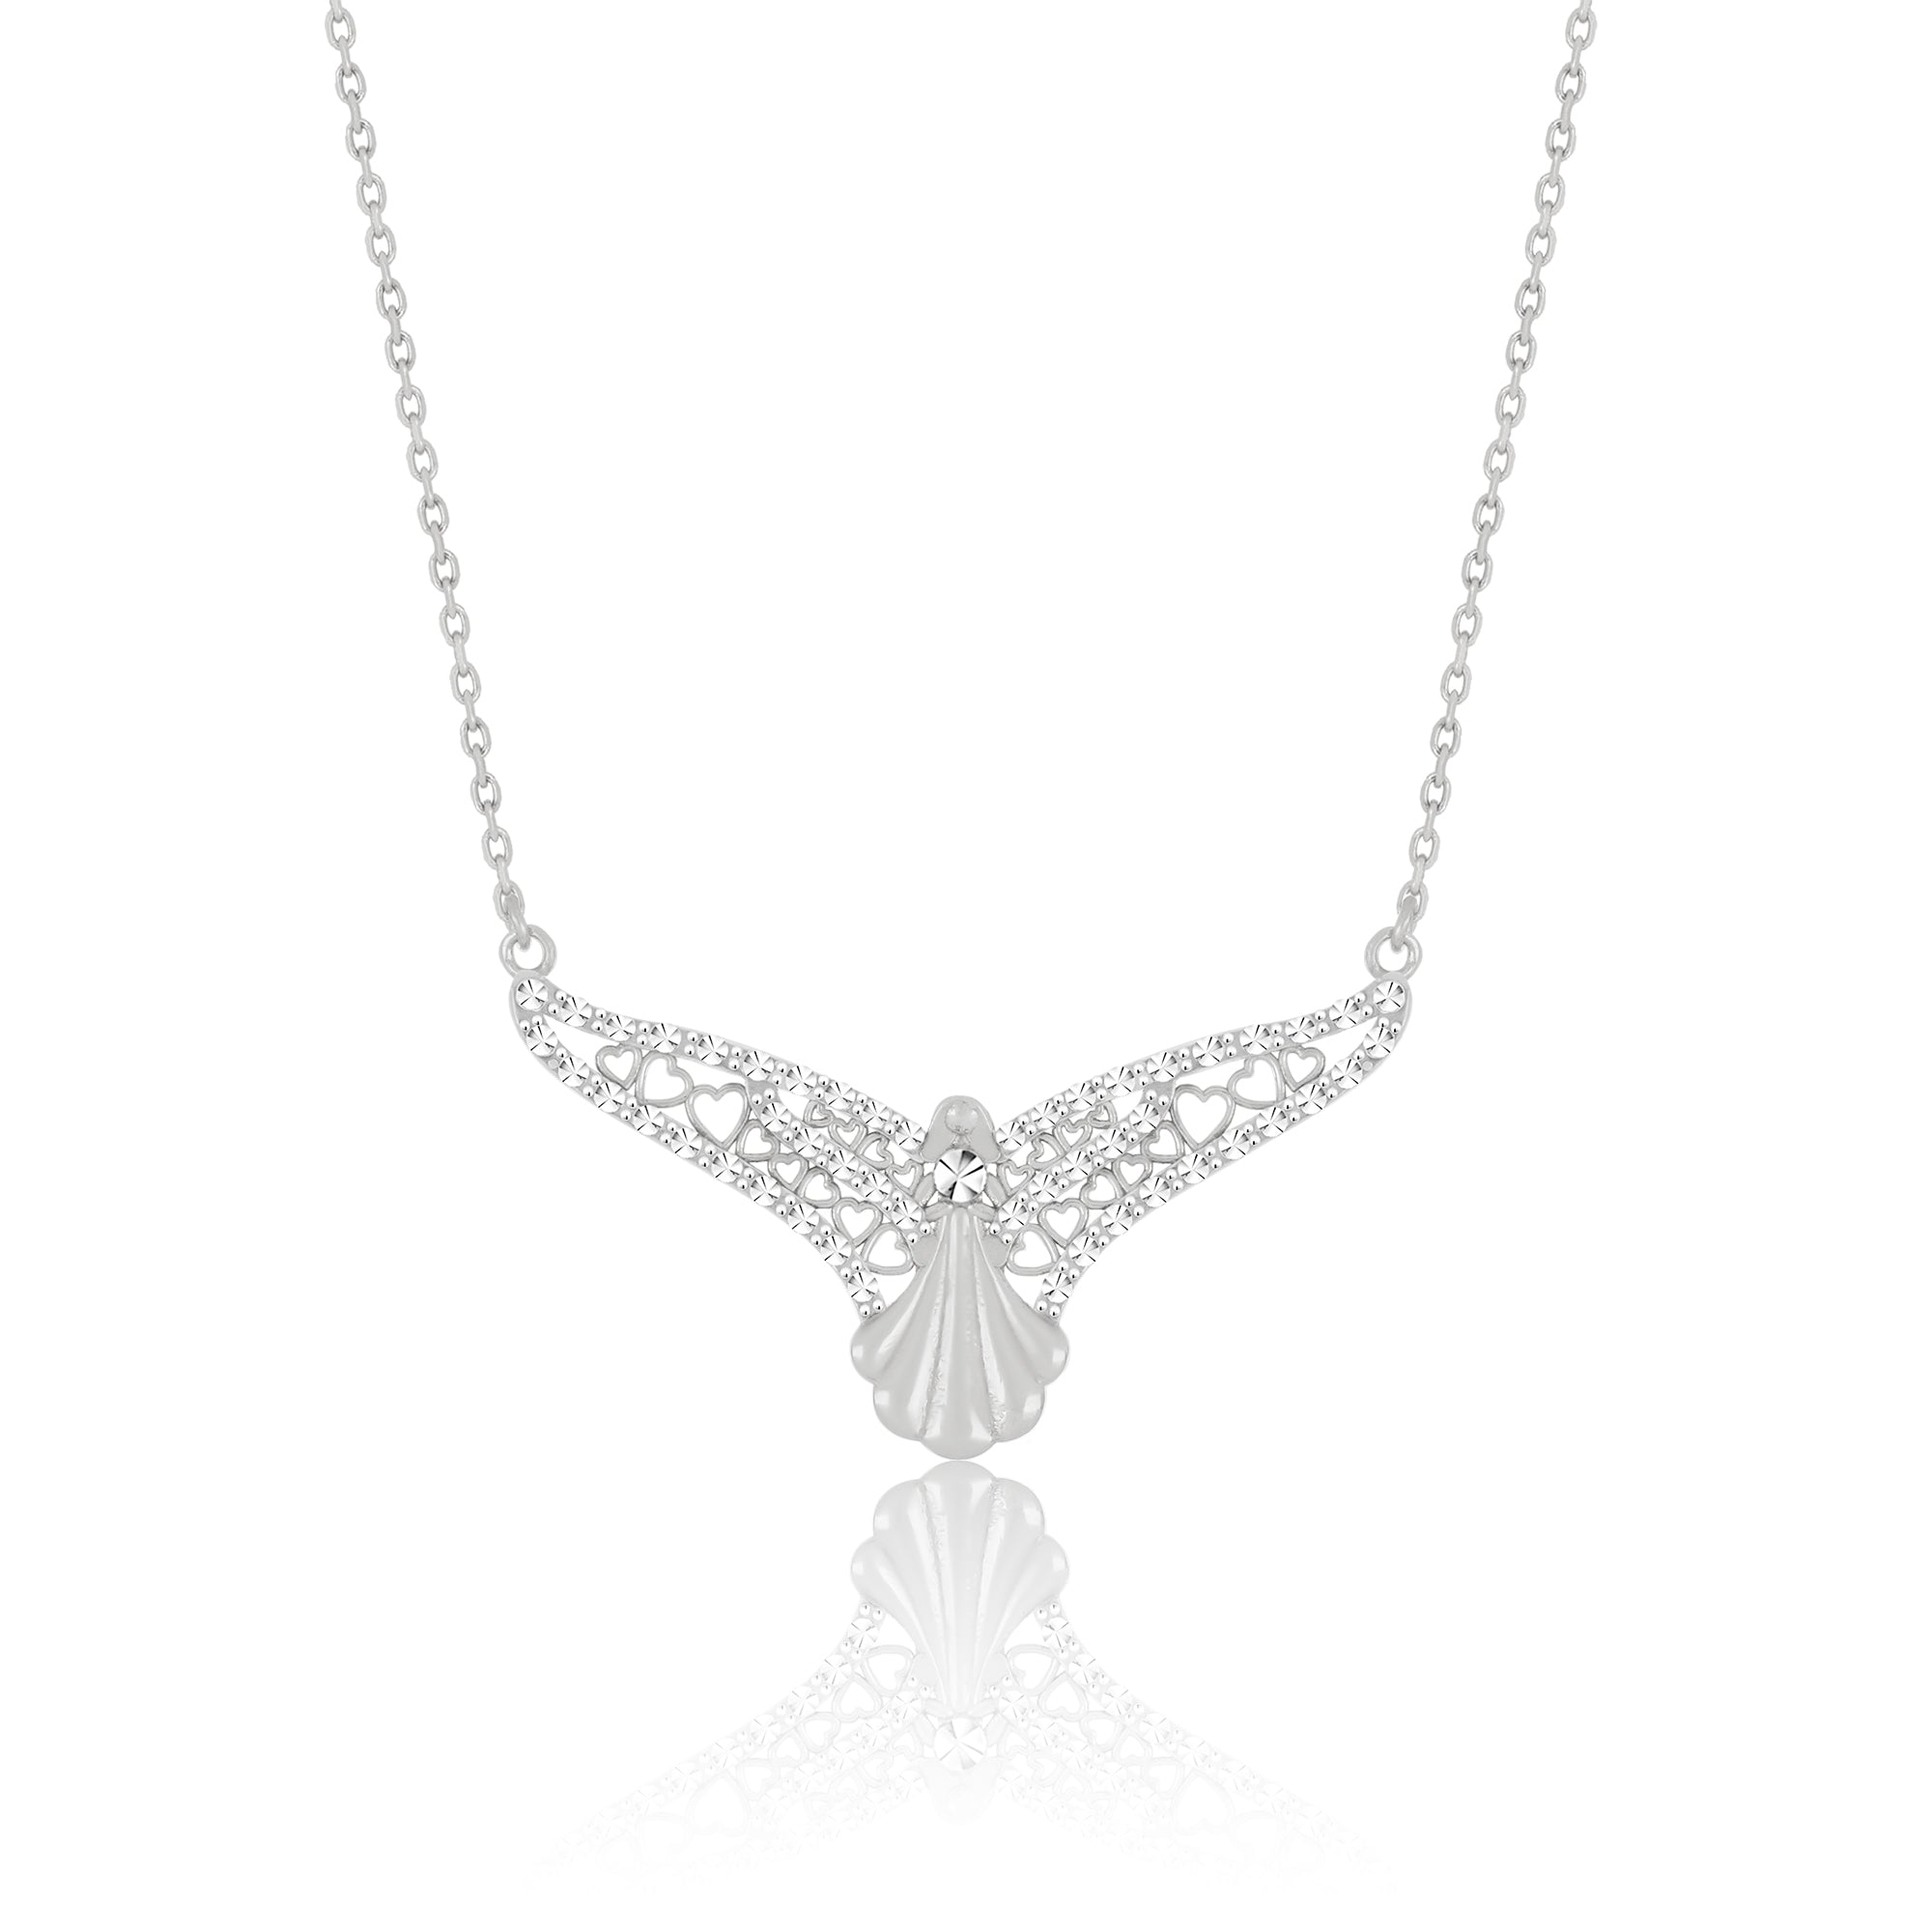 The Heavenly Host Angel Necklace - DressbarnNecklaces